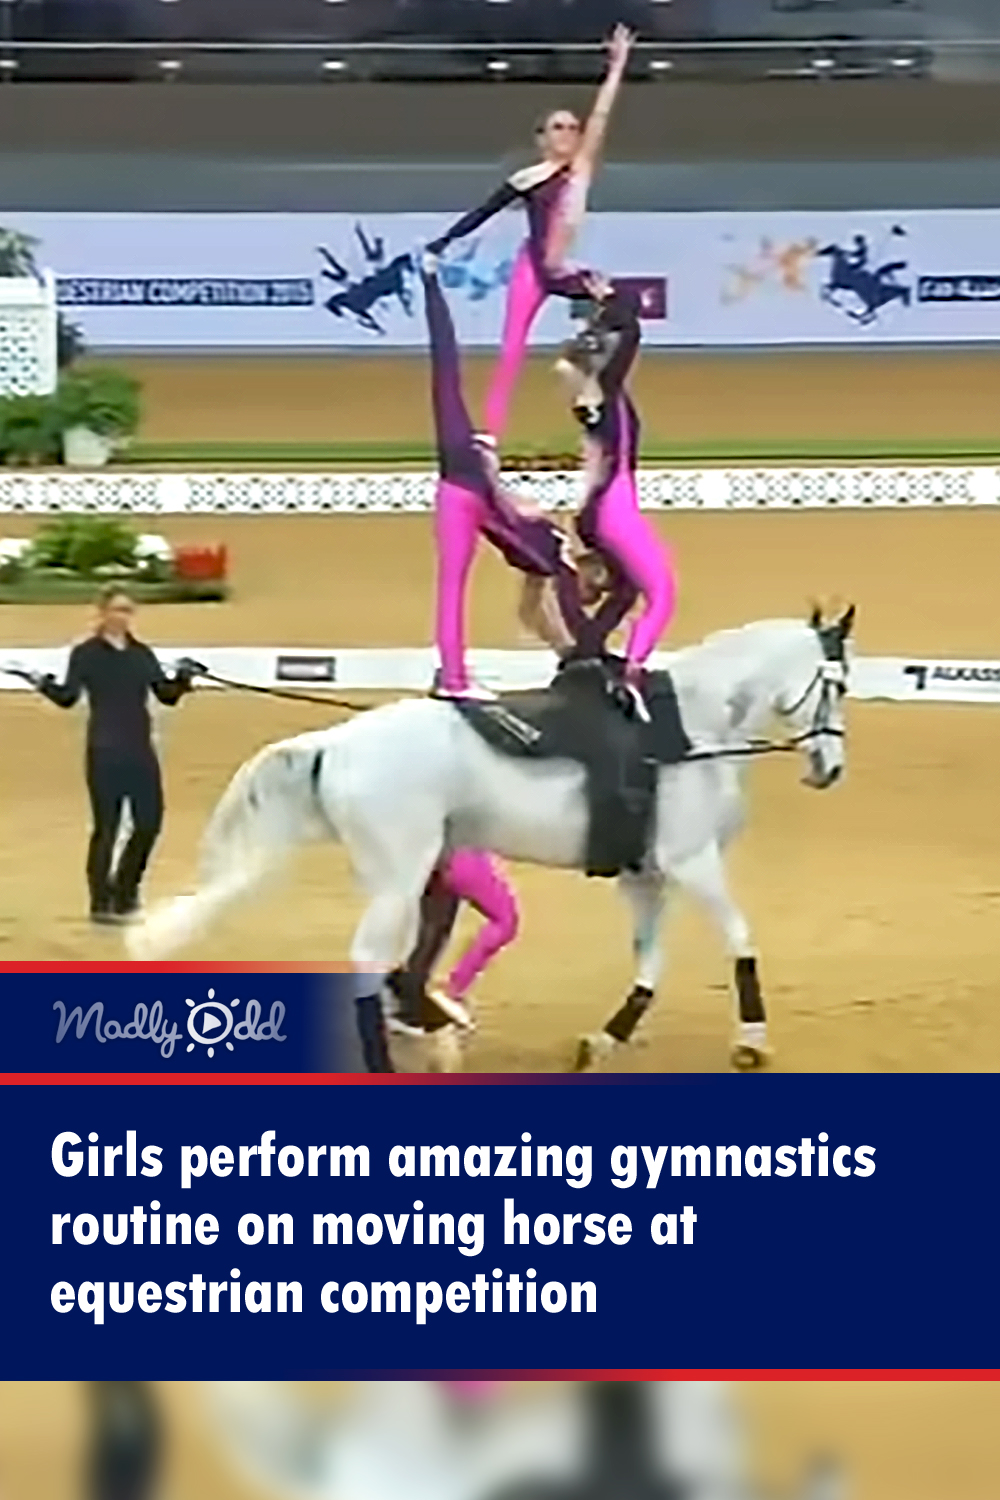 Girls perform amazing gymnastics routine on moving horse at equestrian competition